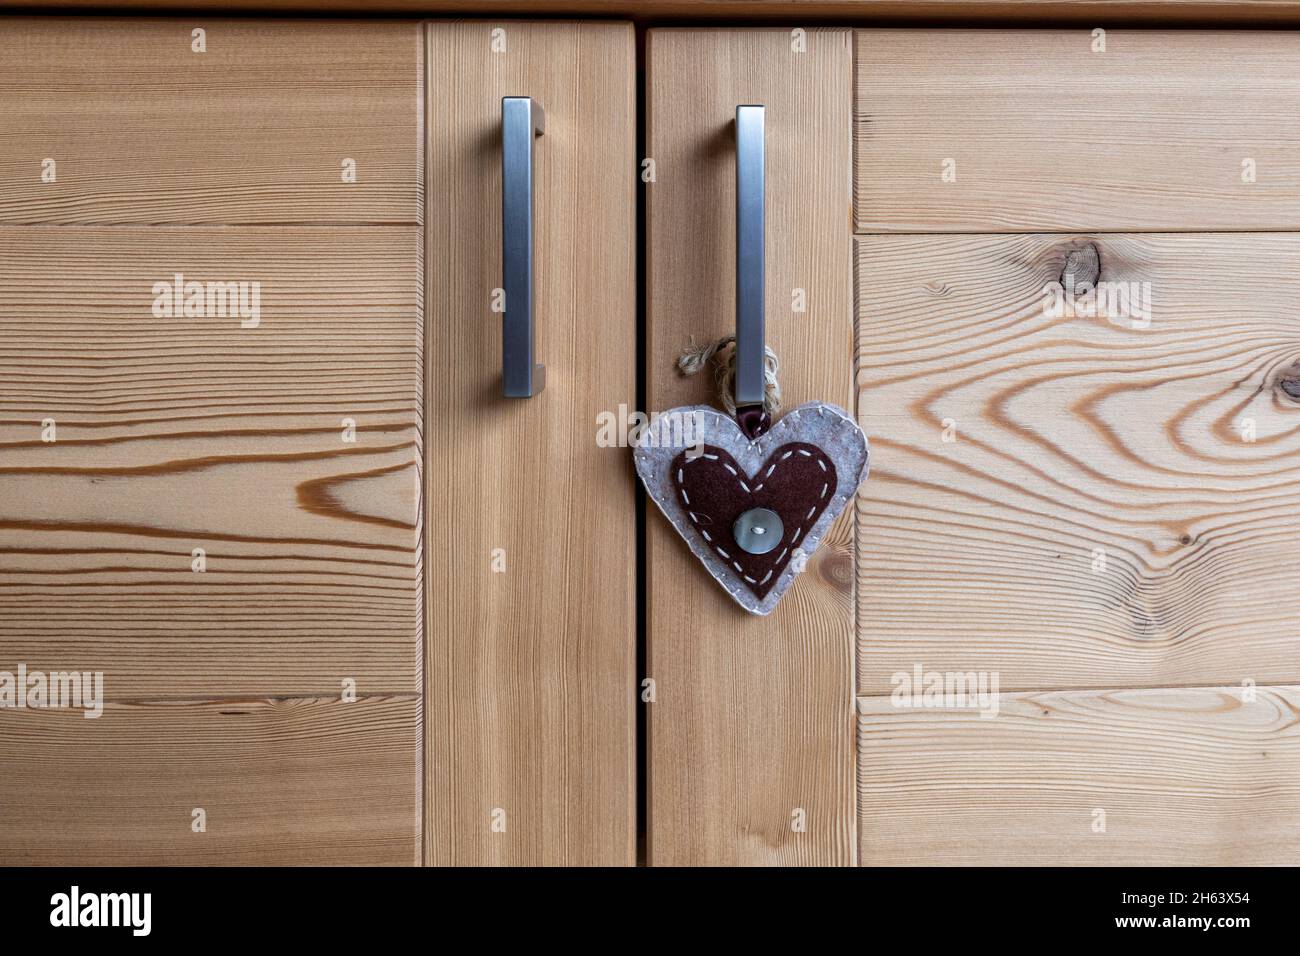 wooden furniture,detail of the doors with an object in the shape of a heart Stock Photo